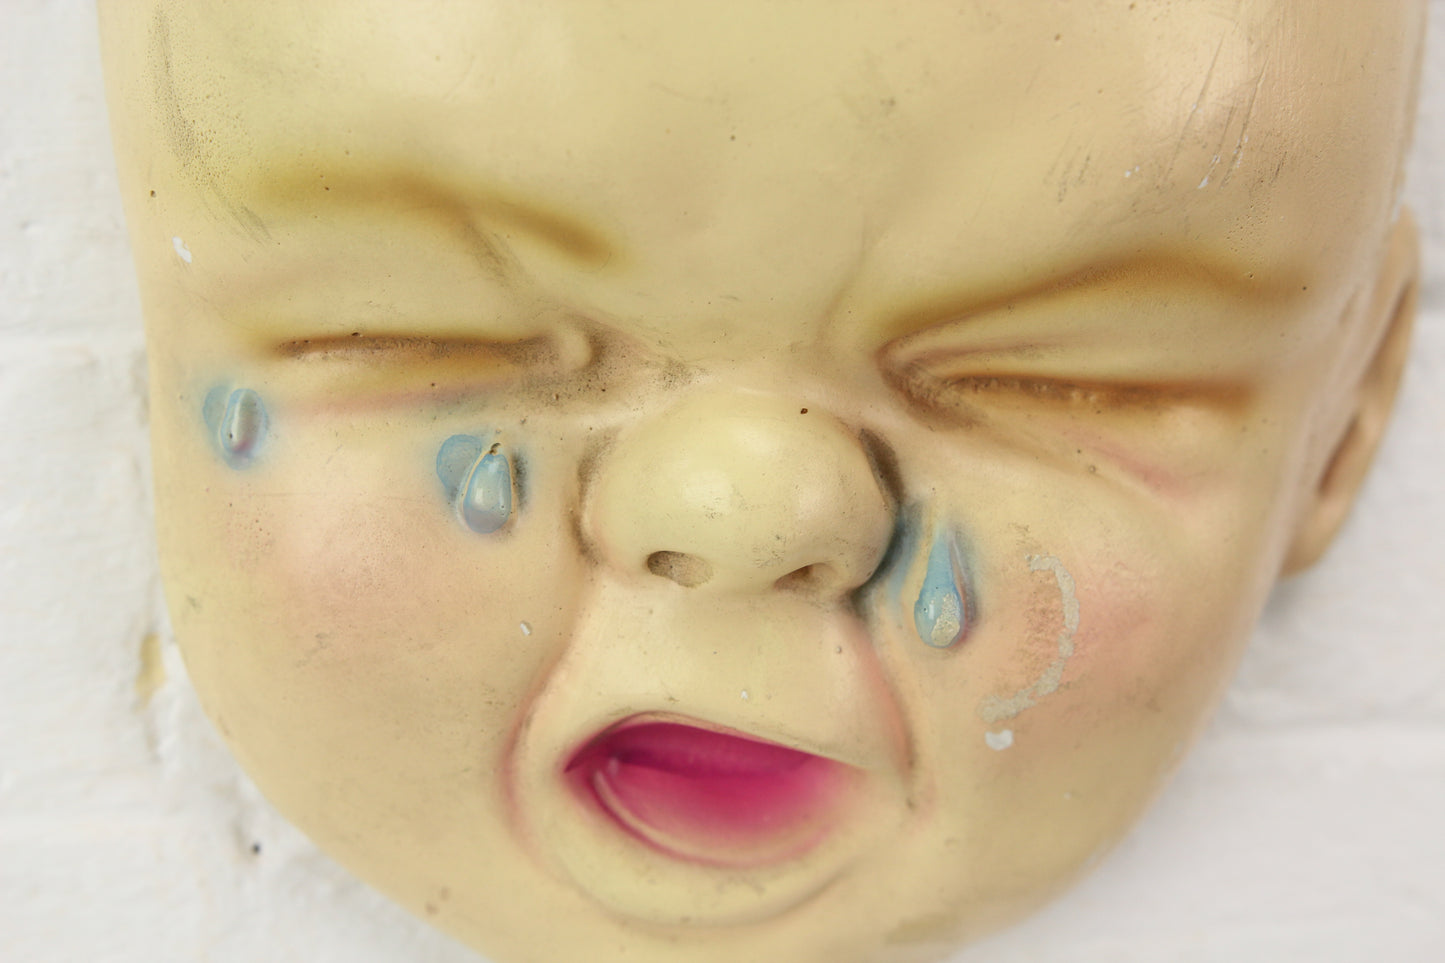 Chalkware Crying Baby Tattoo Reference Wall Hanger